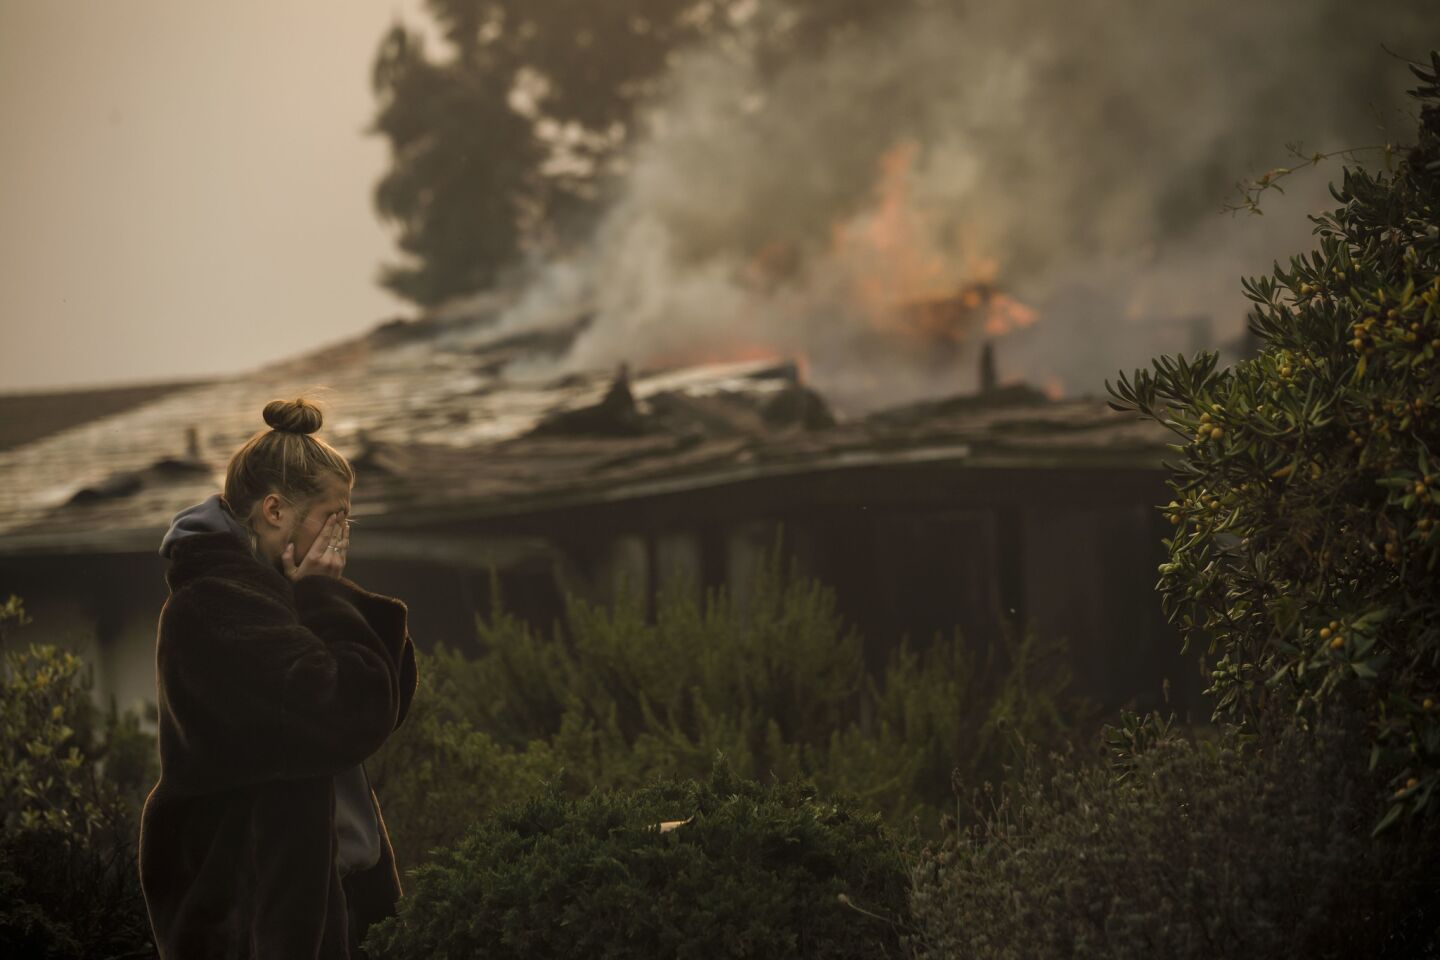 Olivia Jacobson, 16, wipes tears as she looks at her family's home, destroyed by the brush fire on Island View Drive in Ventura.